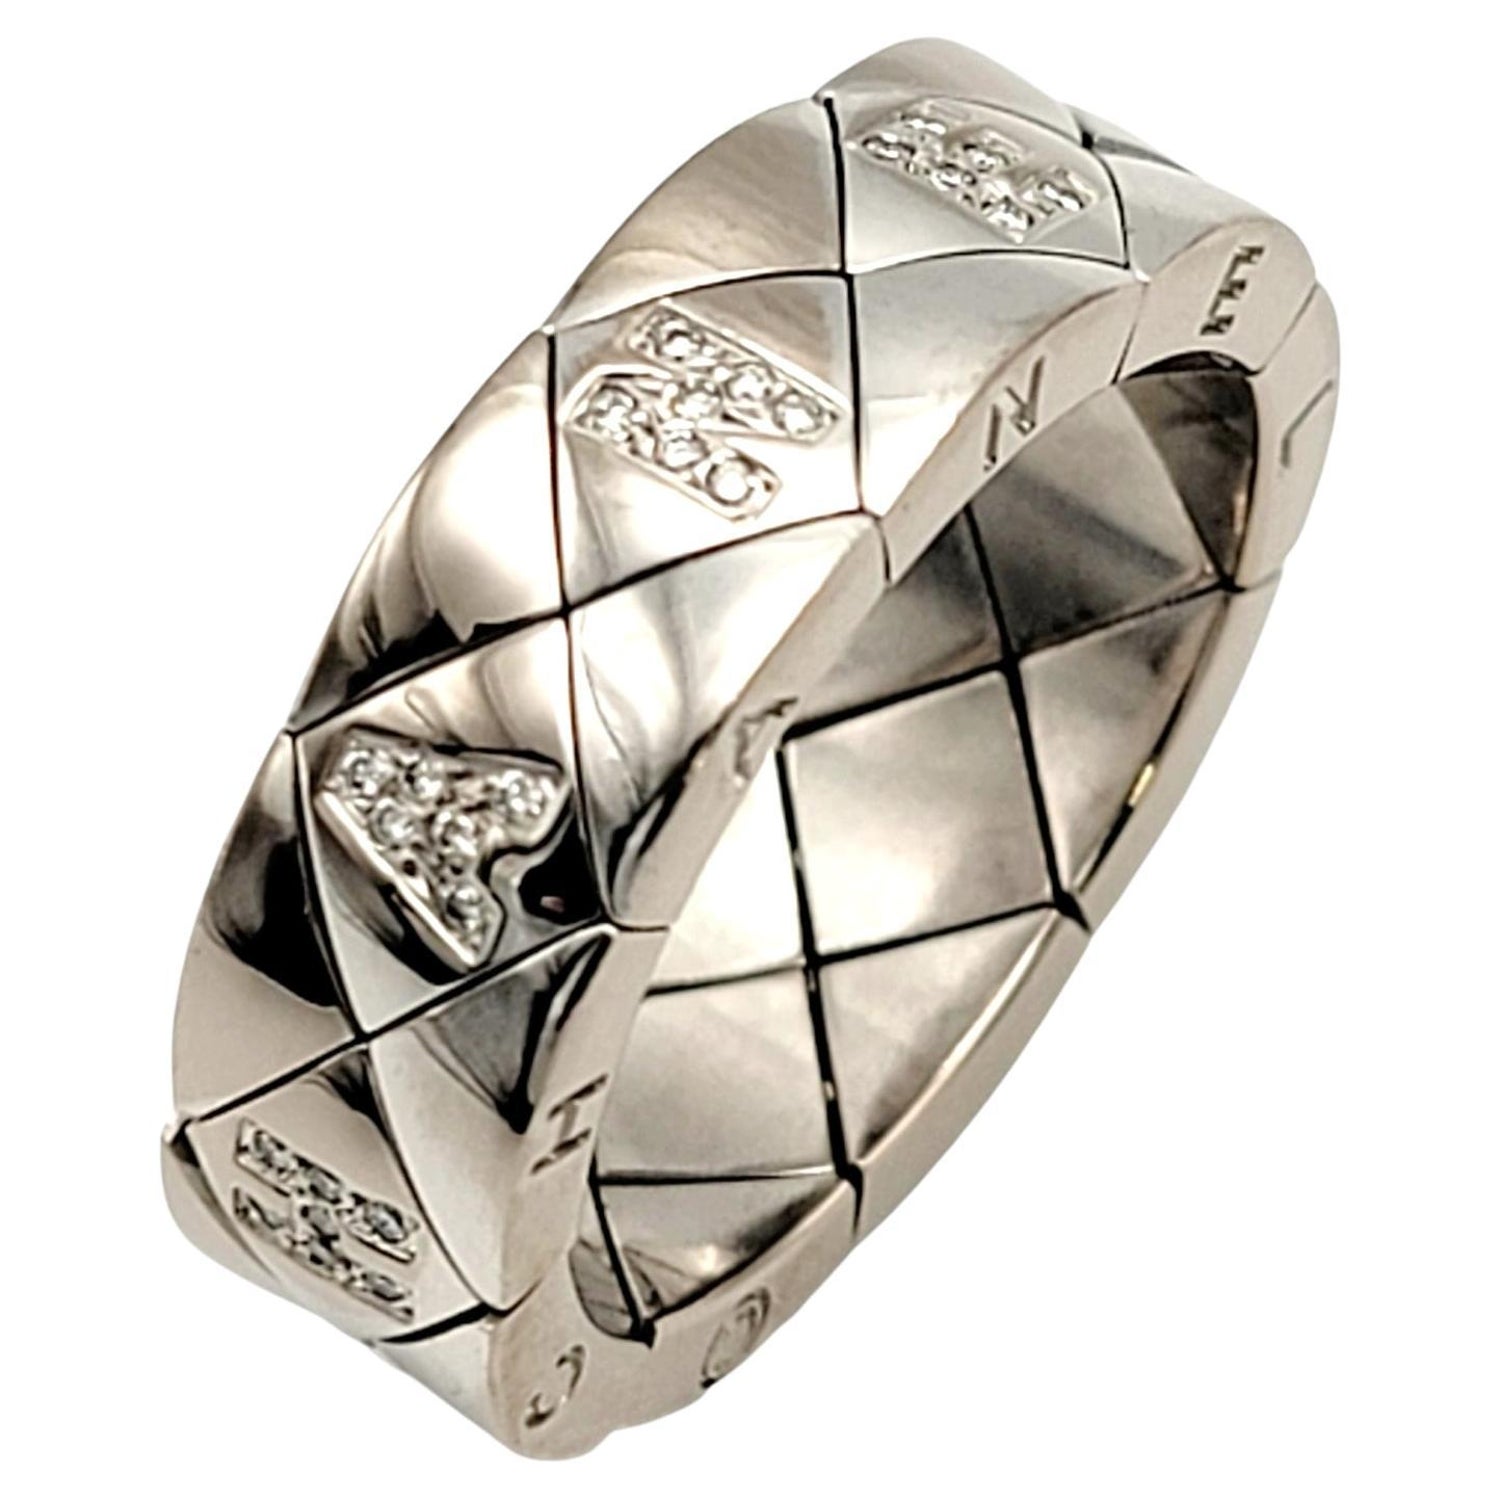 Chanel 'Coco Crush' White Gold and Diamond Ring, Small Model at